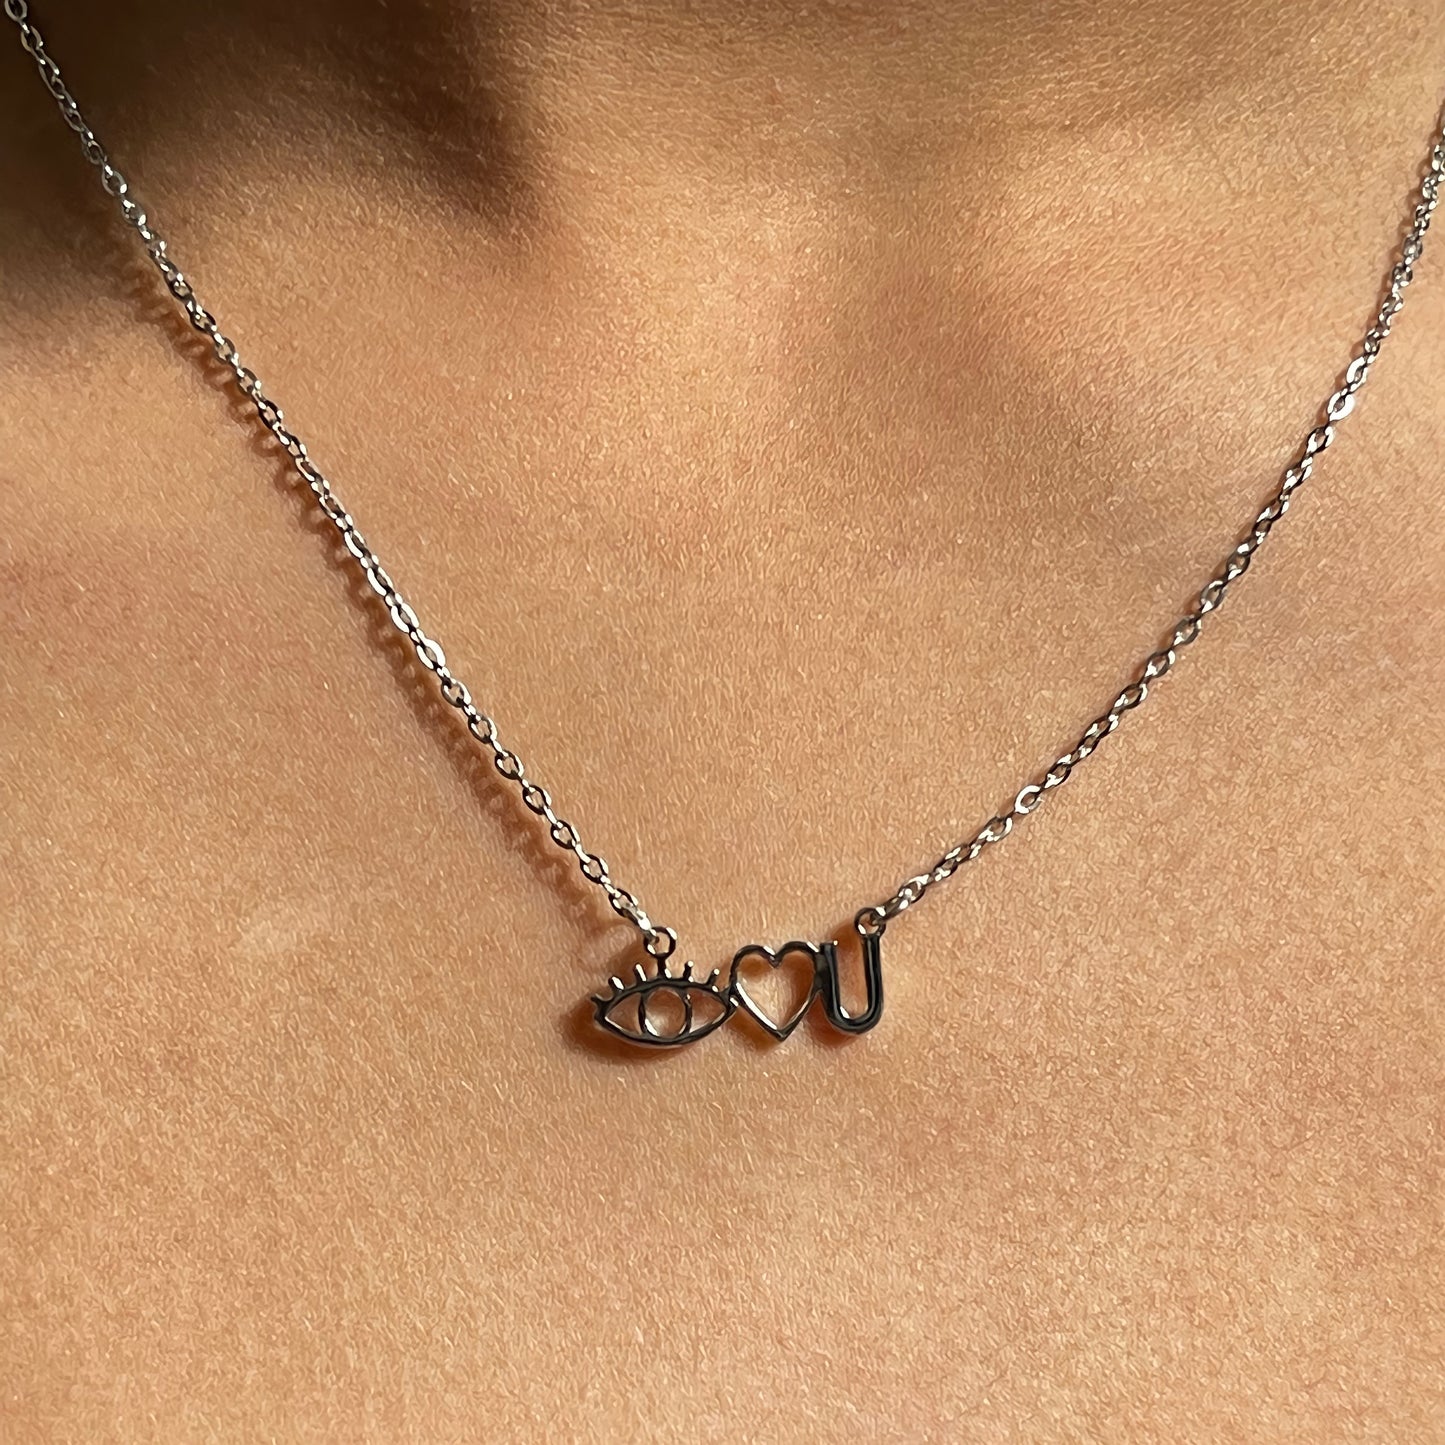 I Love You Rebus Necklace